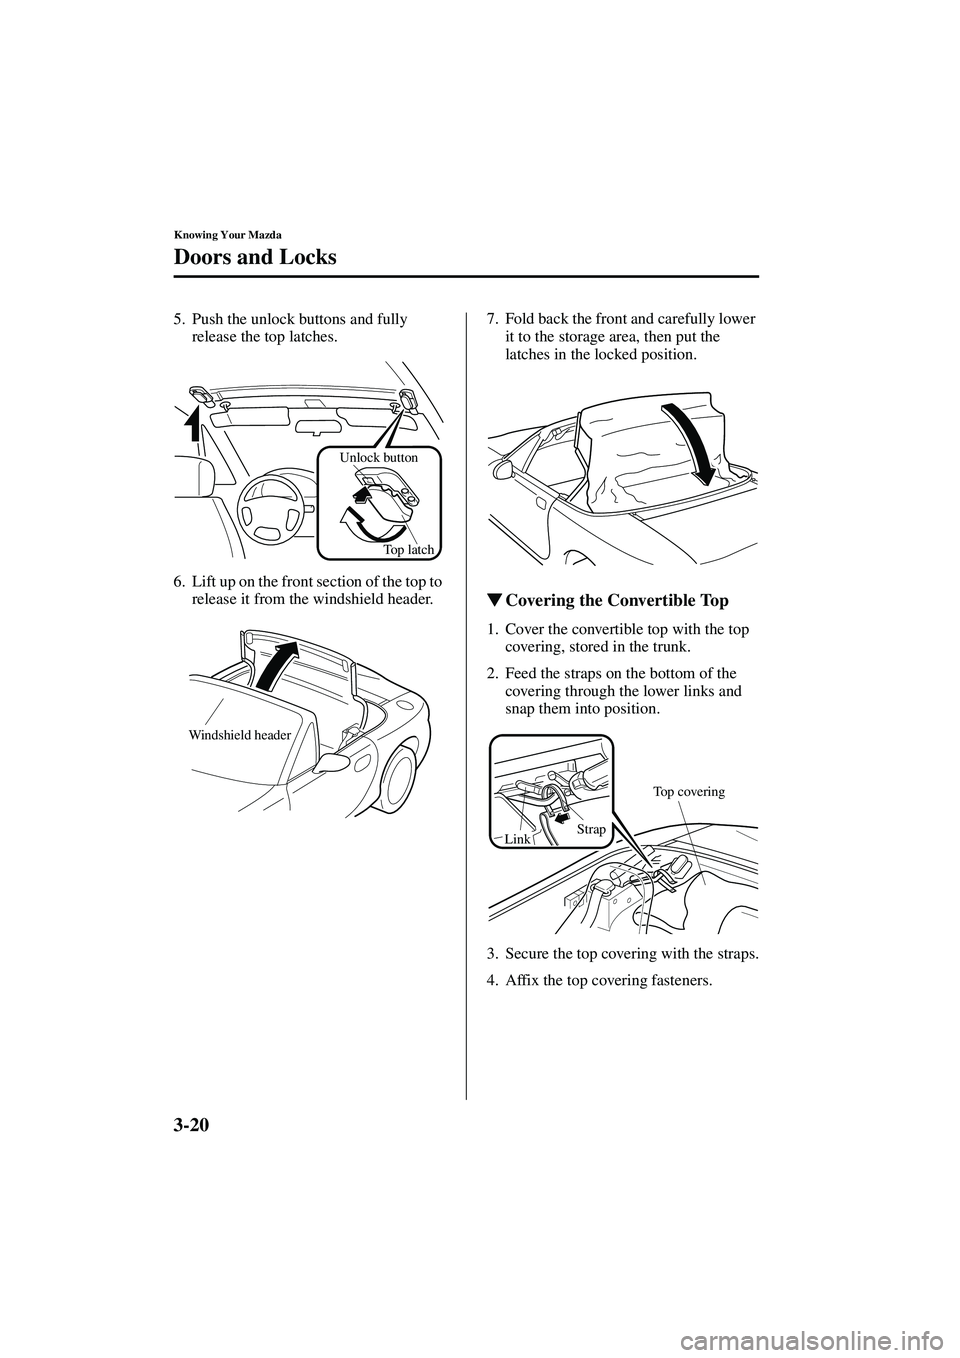 MAZDA MODEL MX-5 MIATA 2004  Owners Manual 3-20
Knowing Your Mazda
Doors and Locks
Form No. 8S15-EA-03G
5. Push the unlock buttons and fully release the top latches.
6. Lift up on the front section of the top to  release it from the windshield